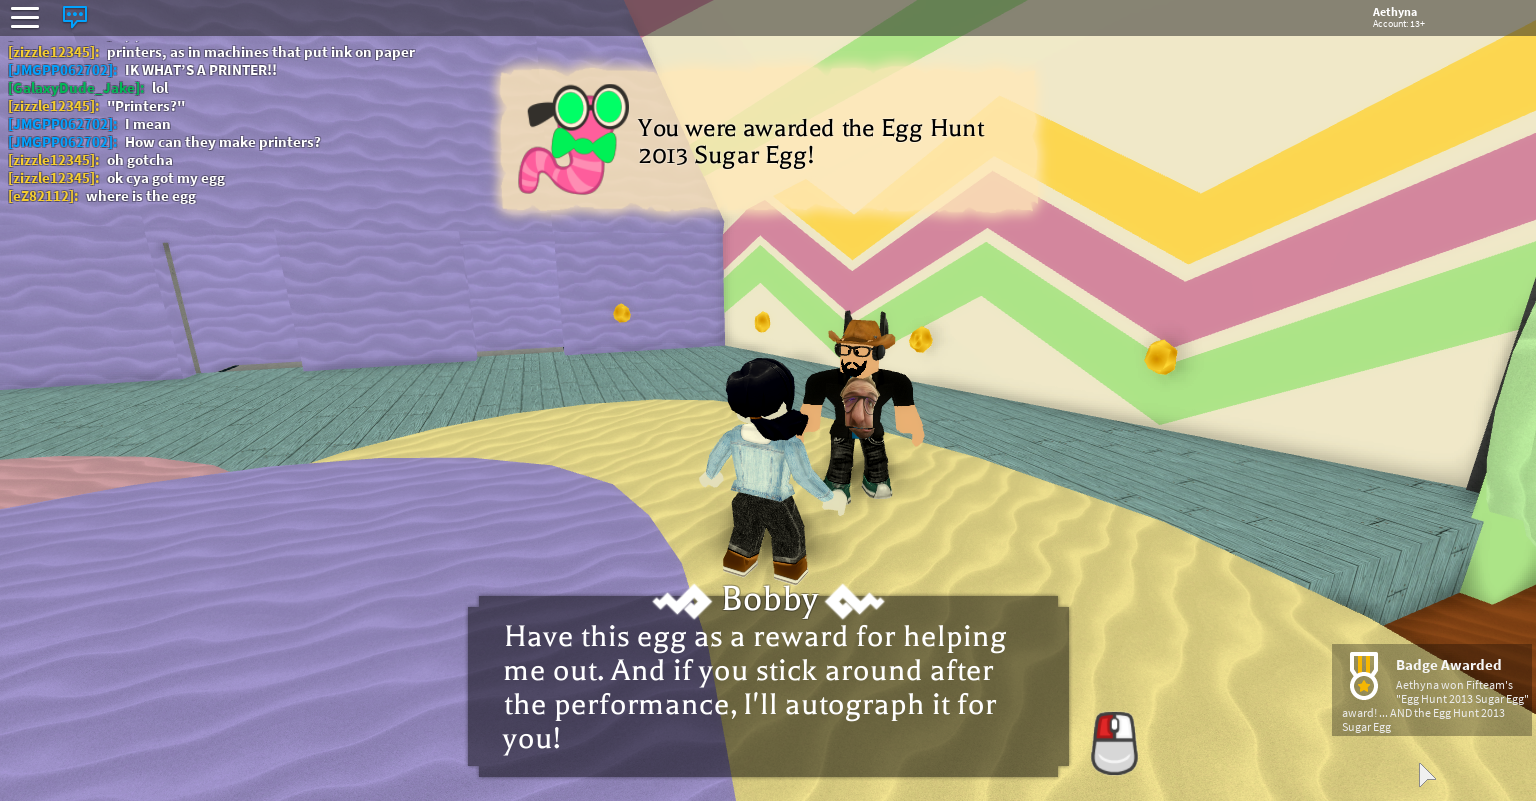 Aveyn S Blog Roblox Egg Hunt 2018 How To Find The Egg Hunt 2013 Sugar Egg In The Festival Of Eggs - egg hunt 2018 the great yolktales roblox